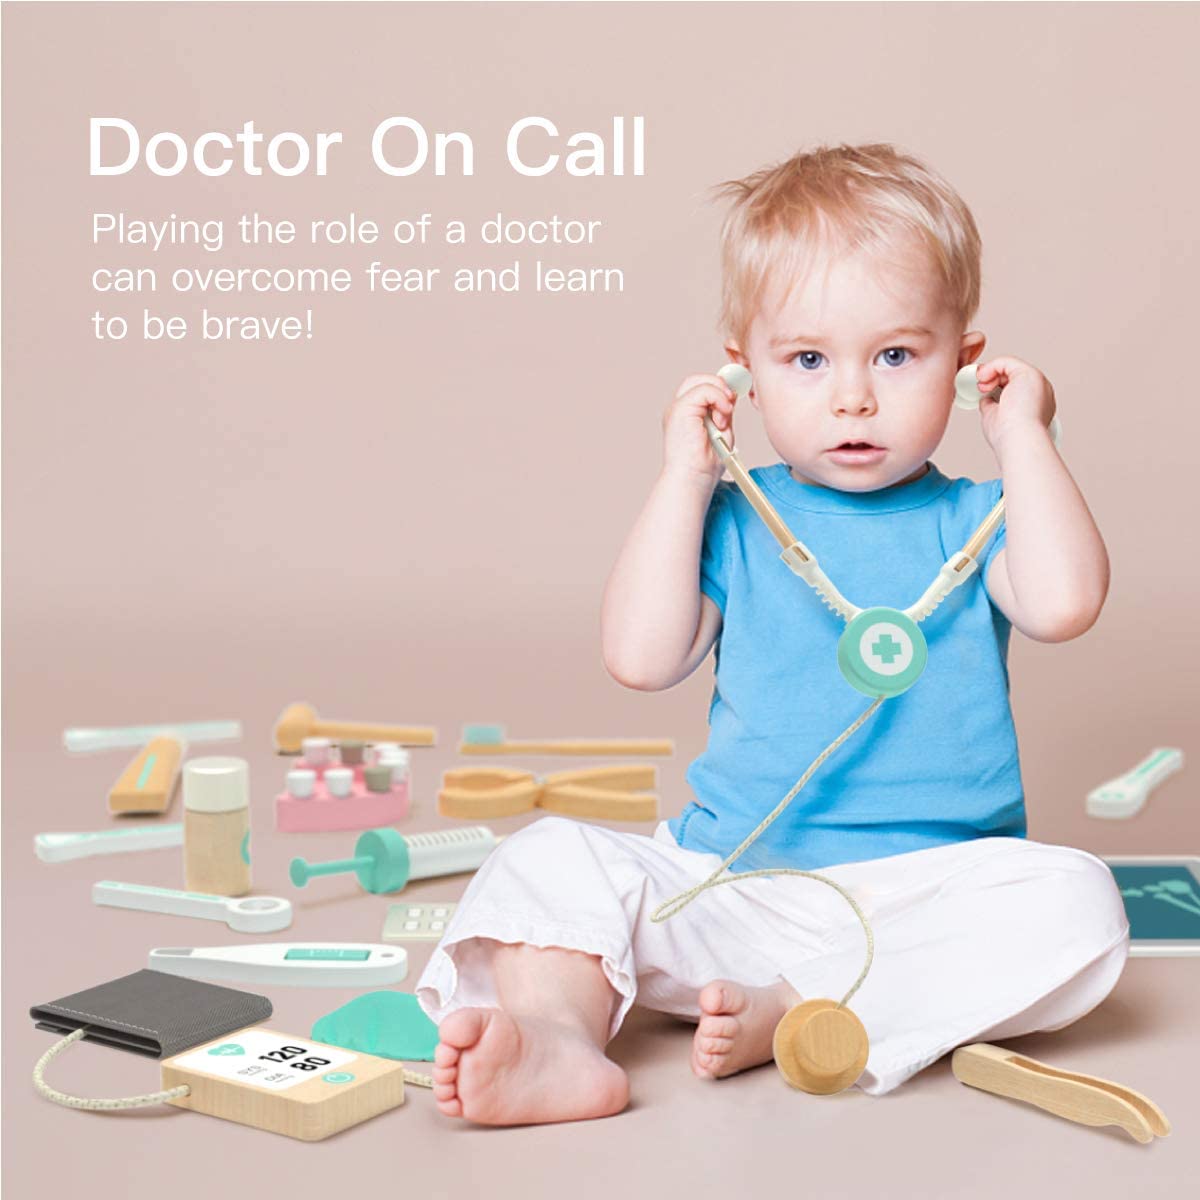 Kibtoy wooden Doctor kit, ideal for pretend play, help children learn and inspire them to be doctors in future. 